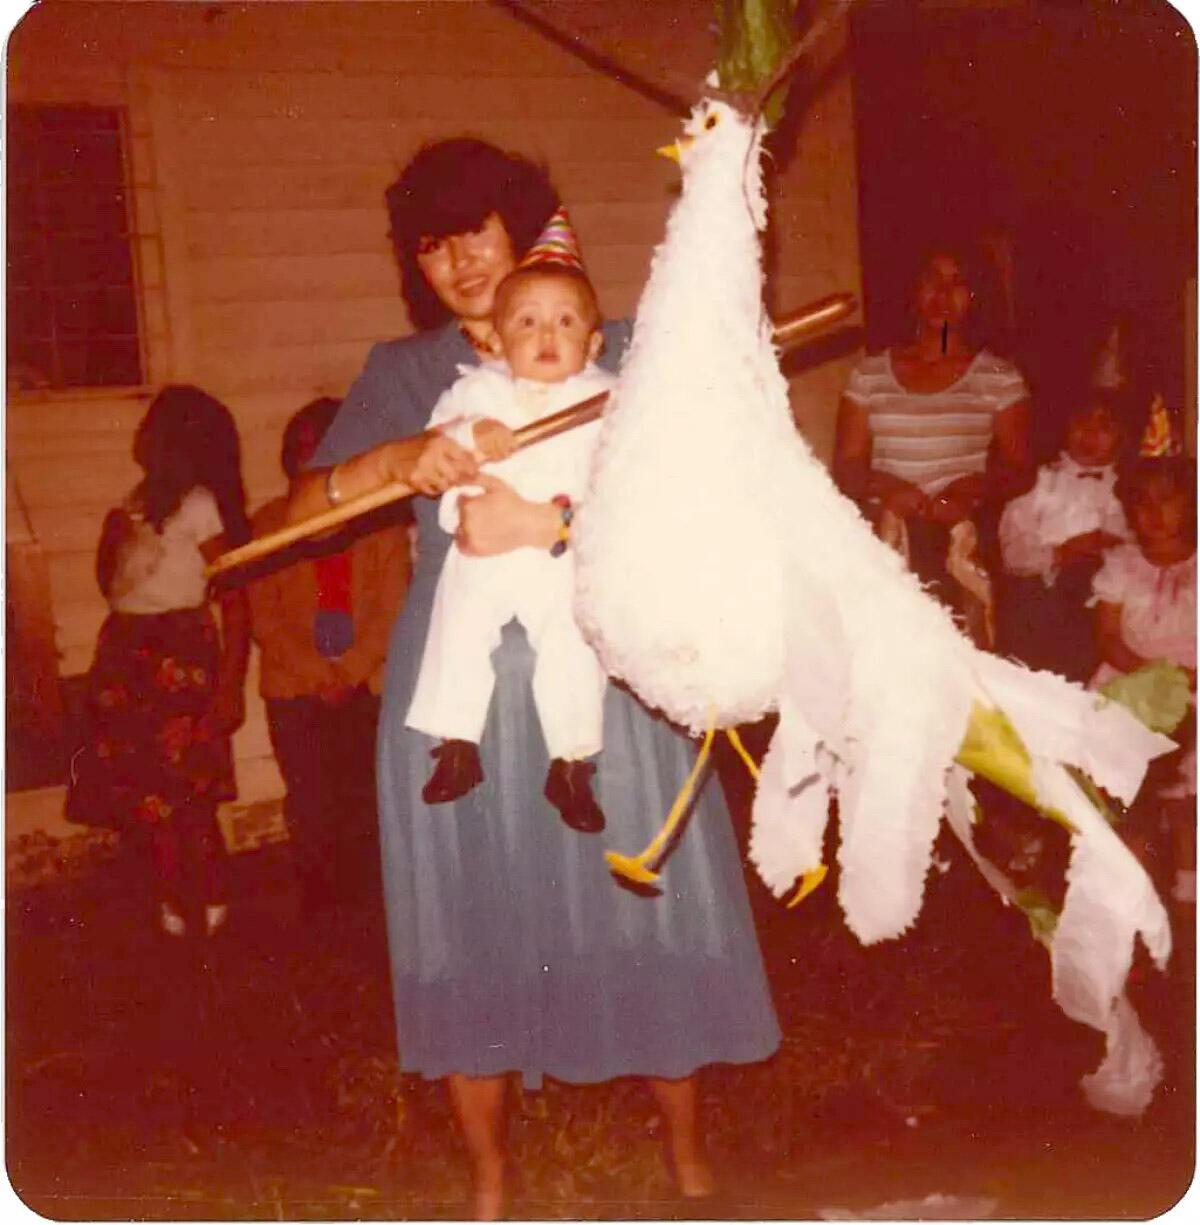 Gustavo and his mom as she holds a stick near a large bird-shaped figure.